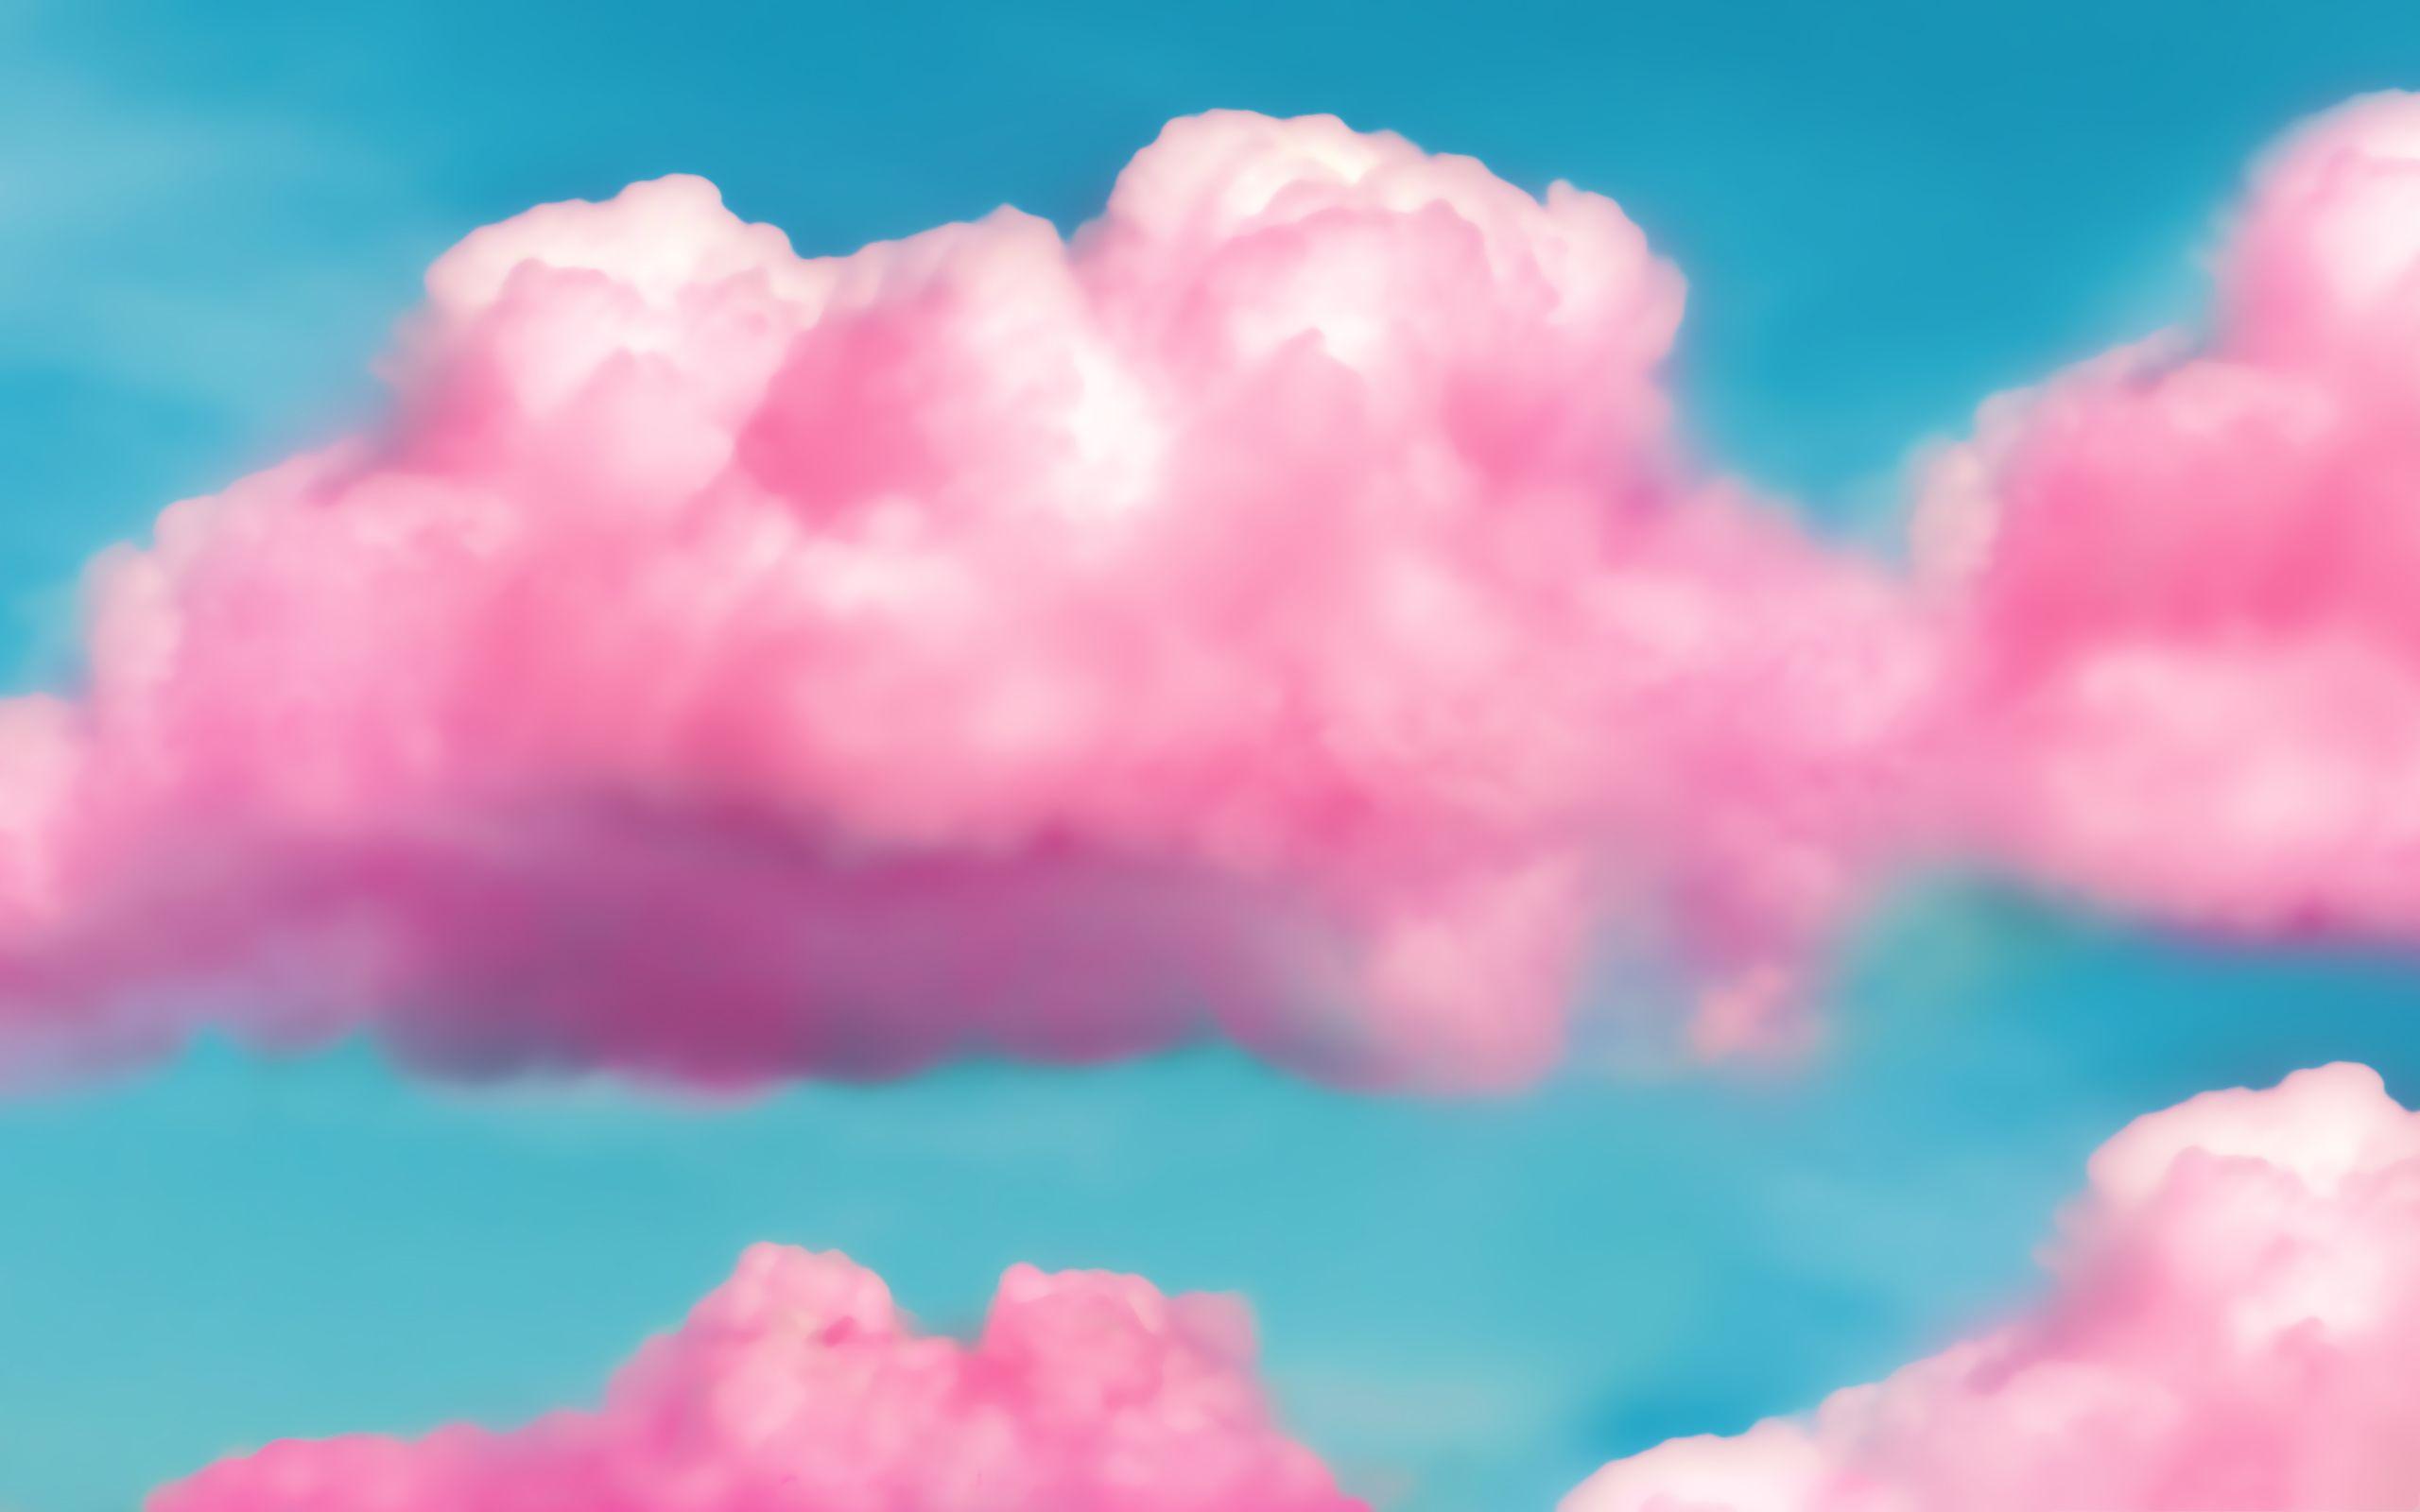 Pink Clouds. Pink clouds Wallpaper Picture Photo Image. Pink